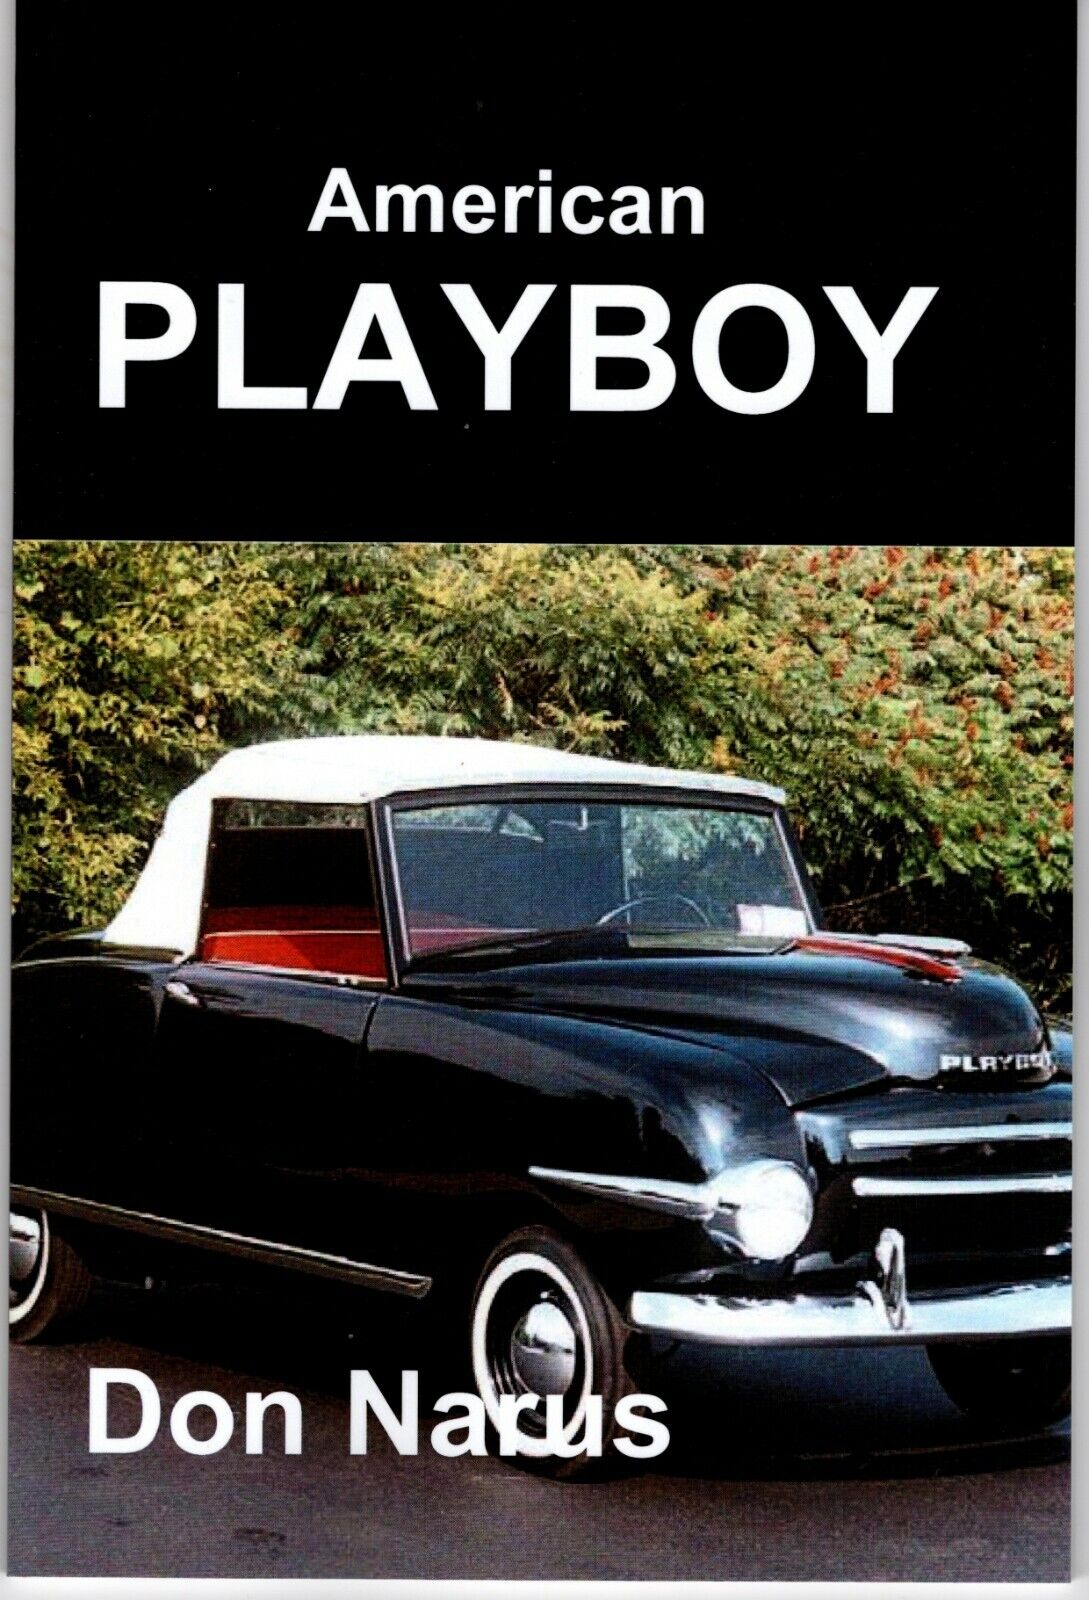 Playboy automobile history book. SPECIAL PRICE